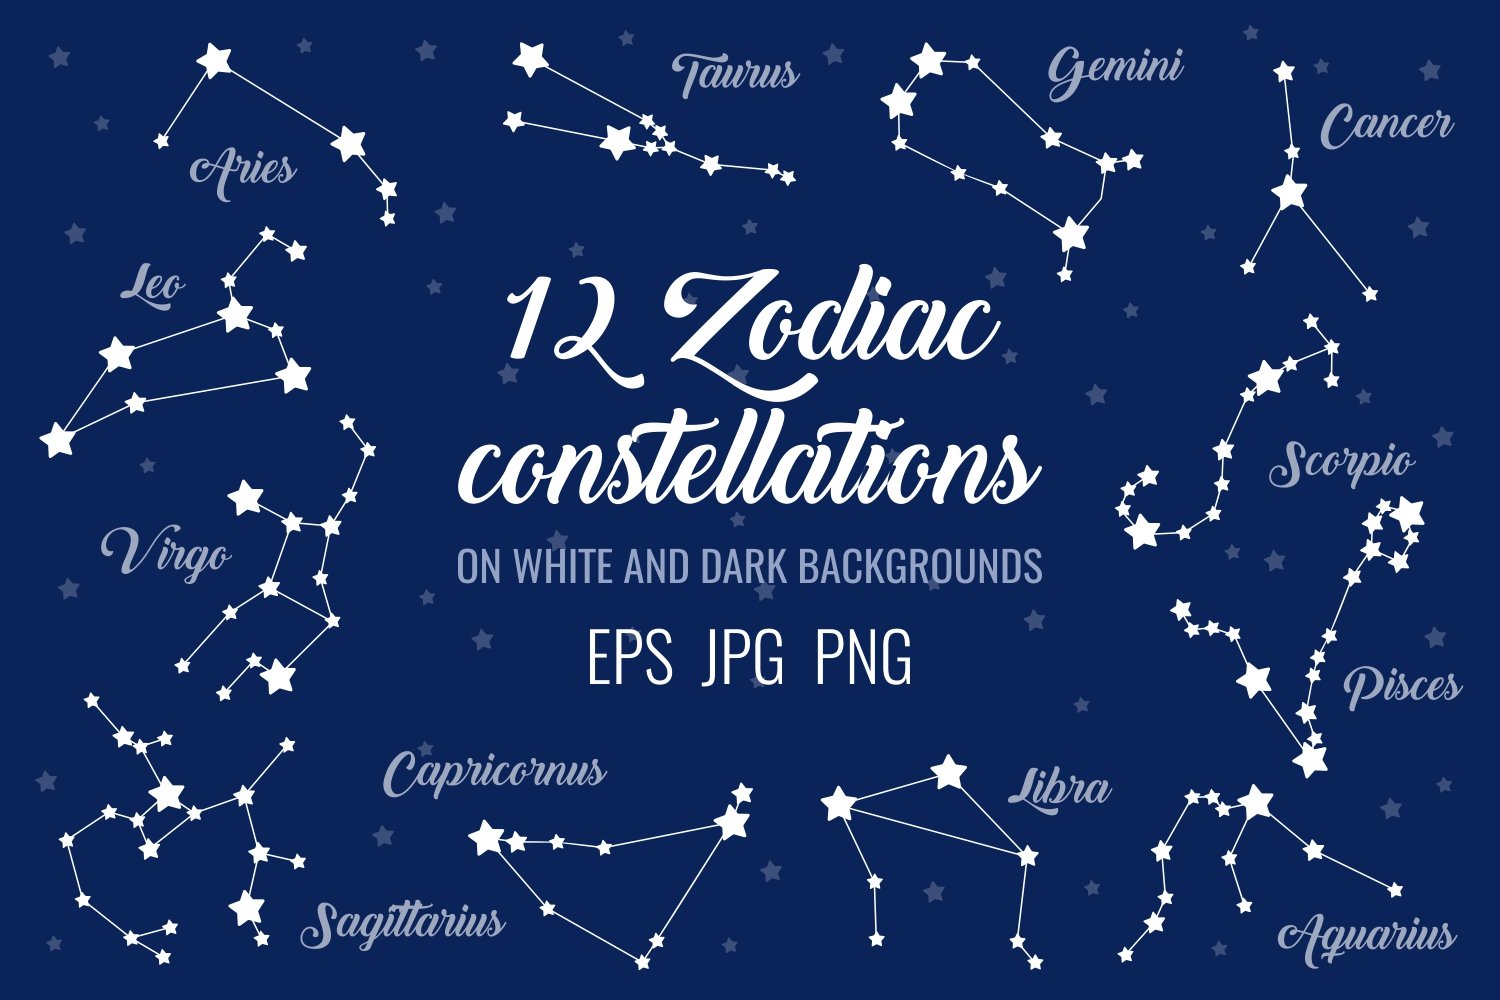 12 zodiac signs constellations cover image.